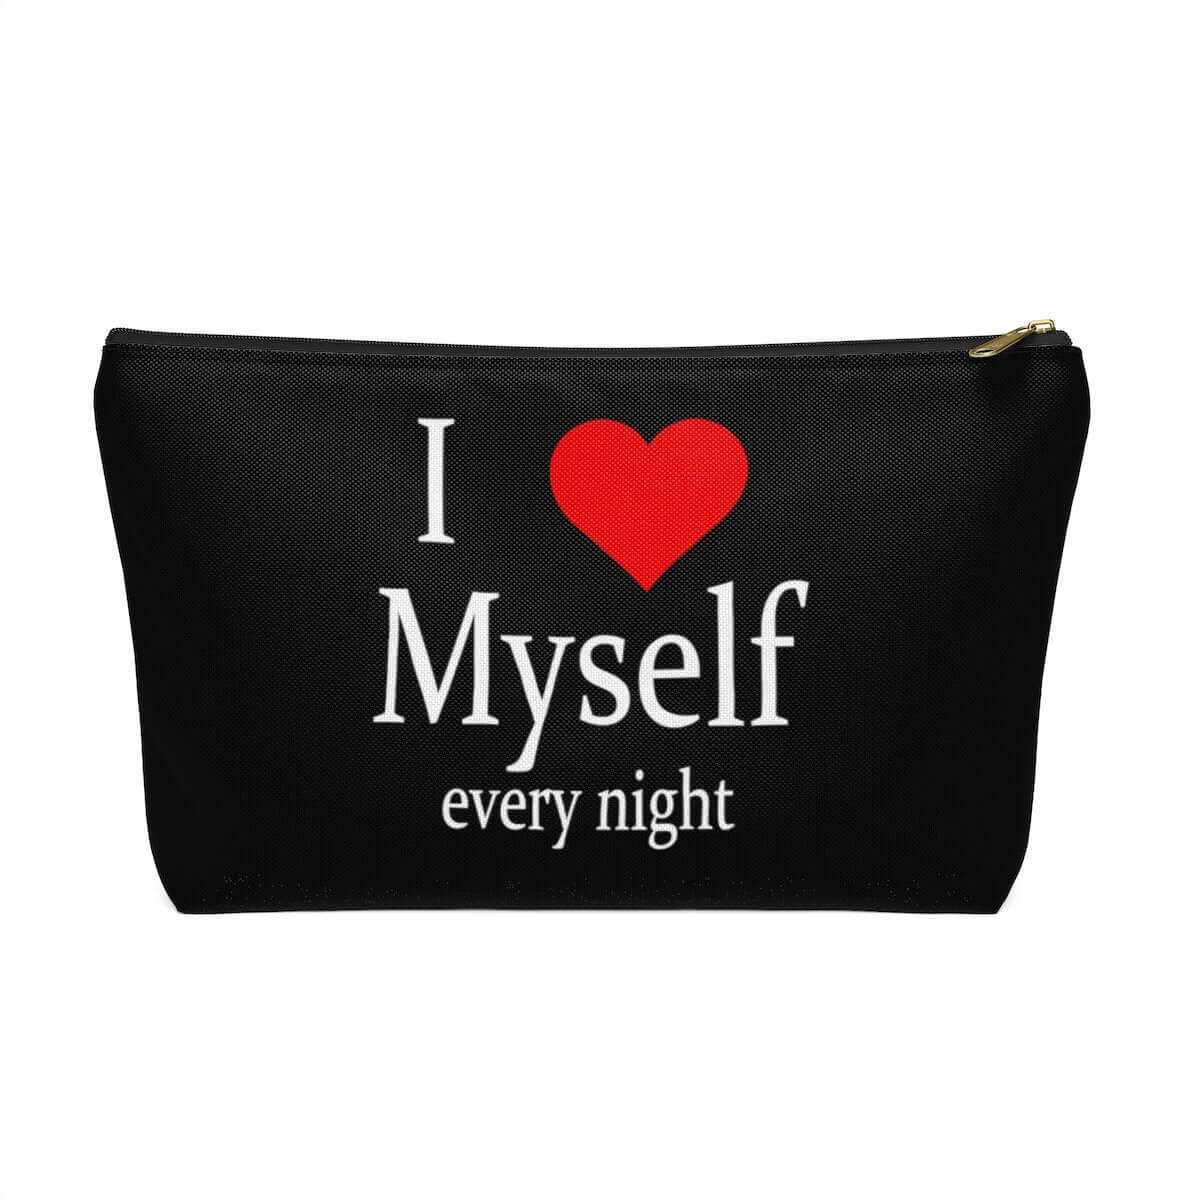 Sex toy pouch bag for vibrator or dildo. Adult toy storage. I love myself every night